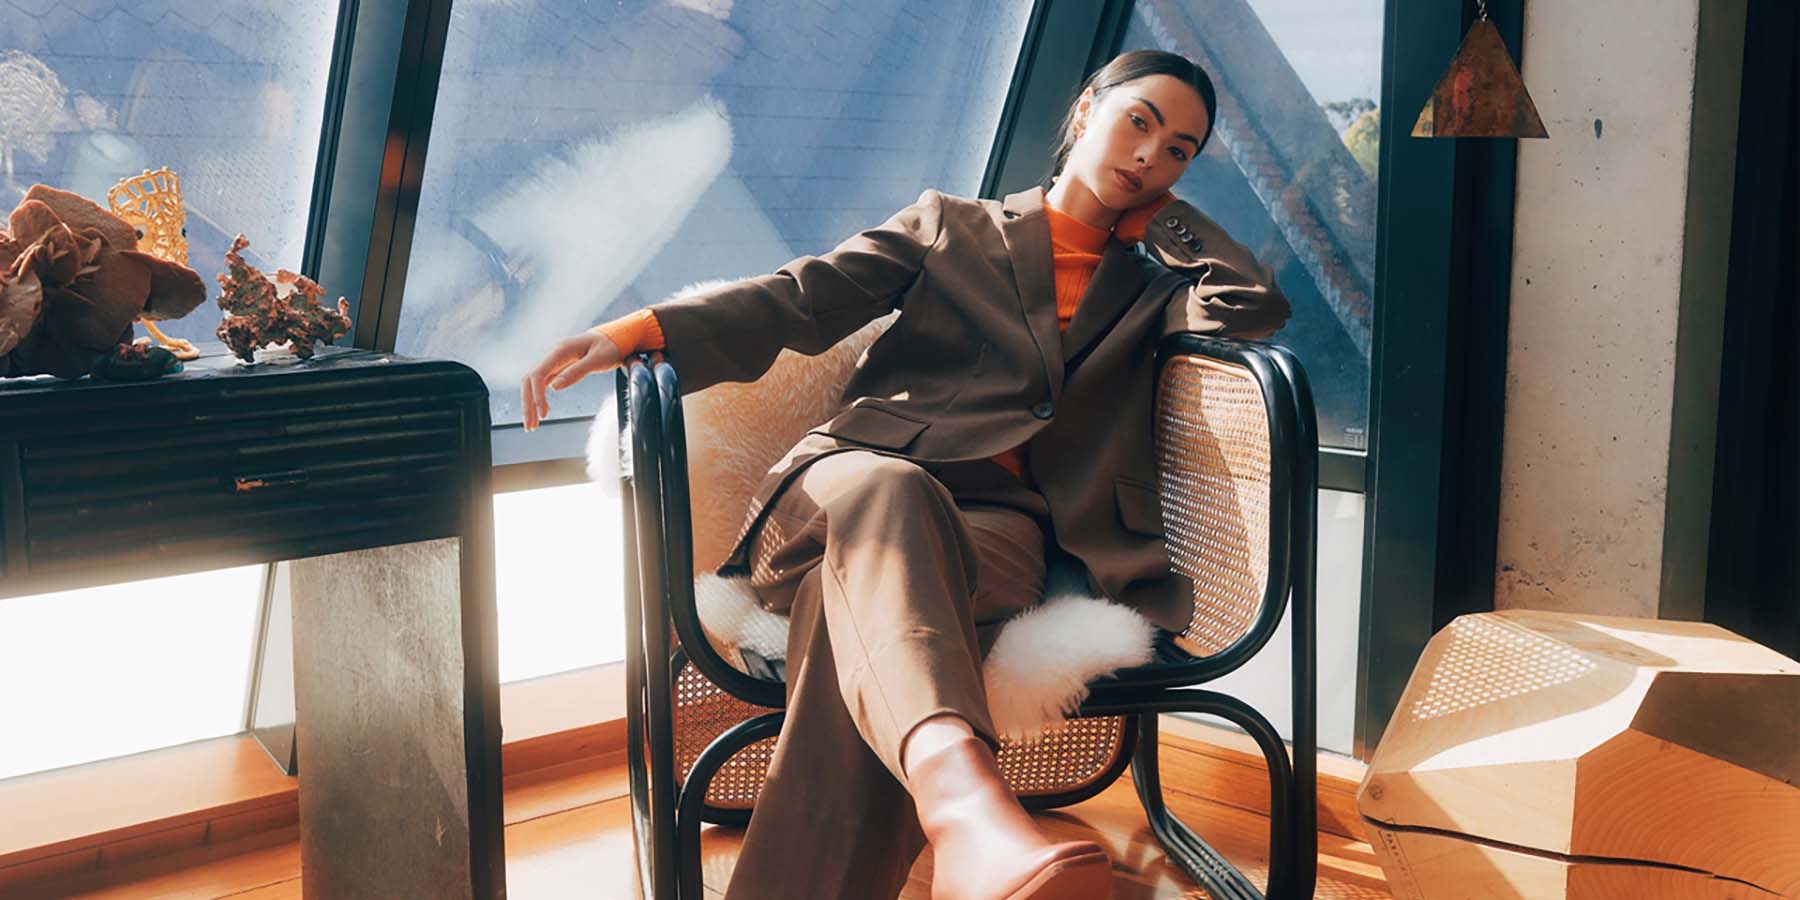 Person sitting in chair wearing a brown suit.